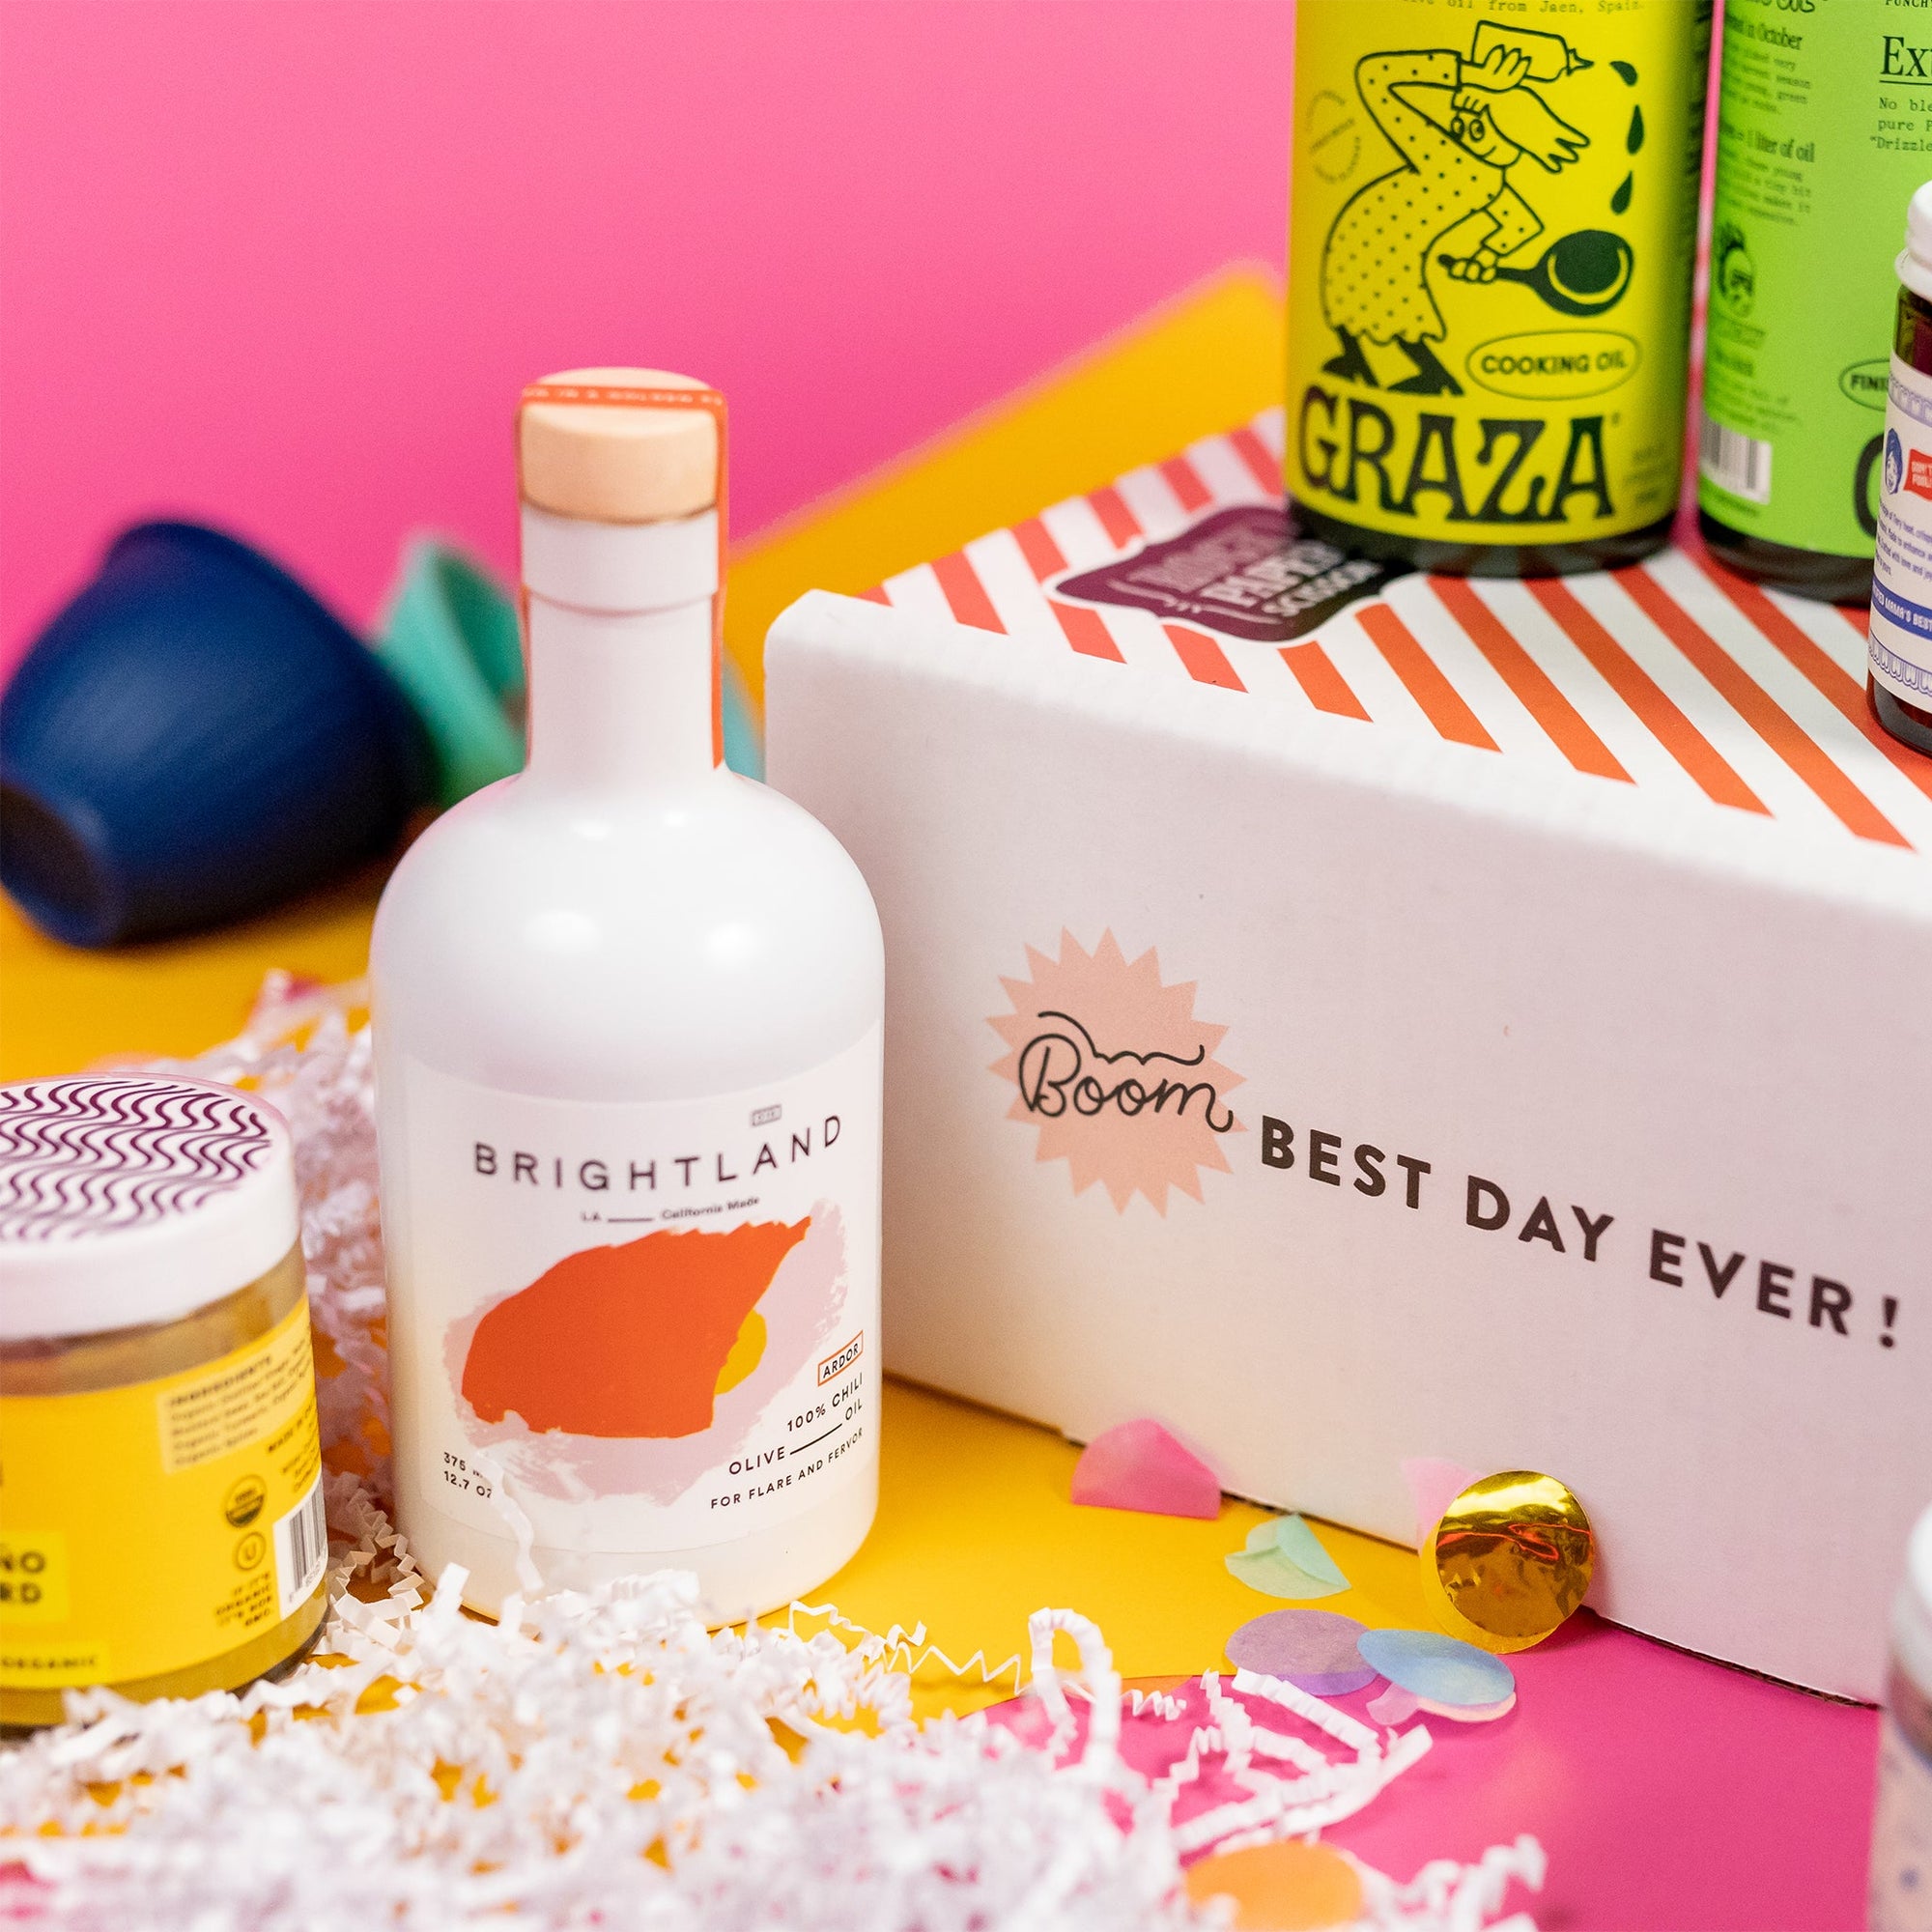 On a hot pink background with mustard wobbly cutout shapes sits a red and white striped shipping box with an assortment of lux kitchen accoutrements stacked around it on white paper crinkle with confetti. The side of the box says "BOOM Best Day Ever!" The photo is a close-up of a white bottle of Brightland Olive Oil.